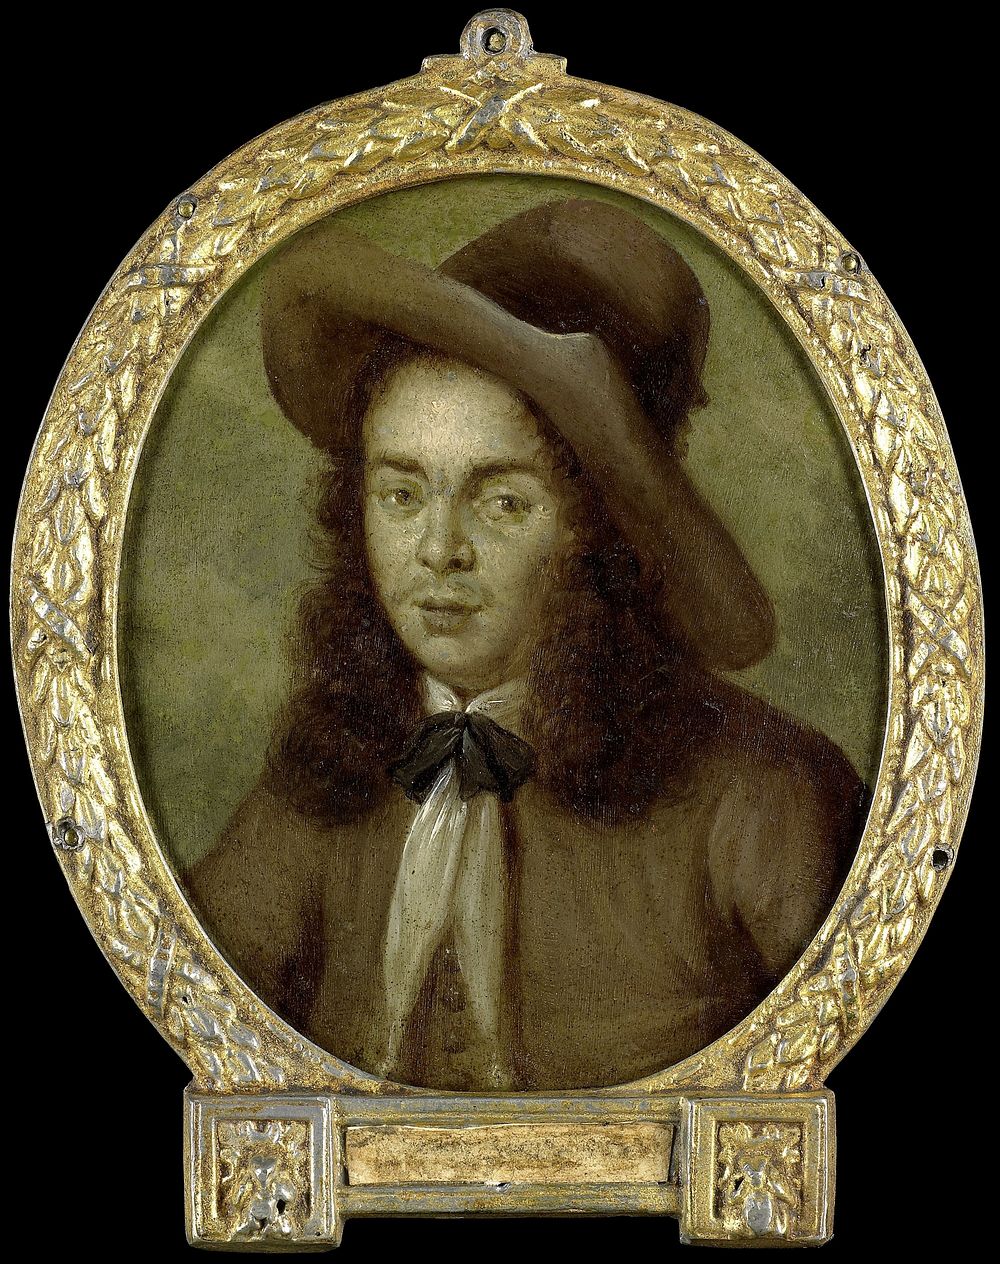 Portrait of Aernout van Overbeke, Explorer and Poet (1732 - 1771) by Jan Maurits Quinkhard